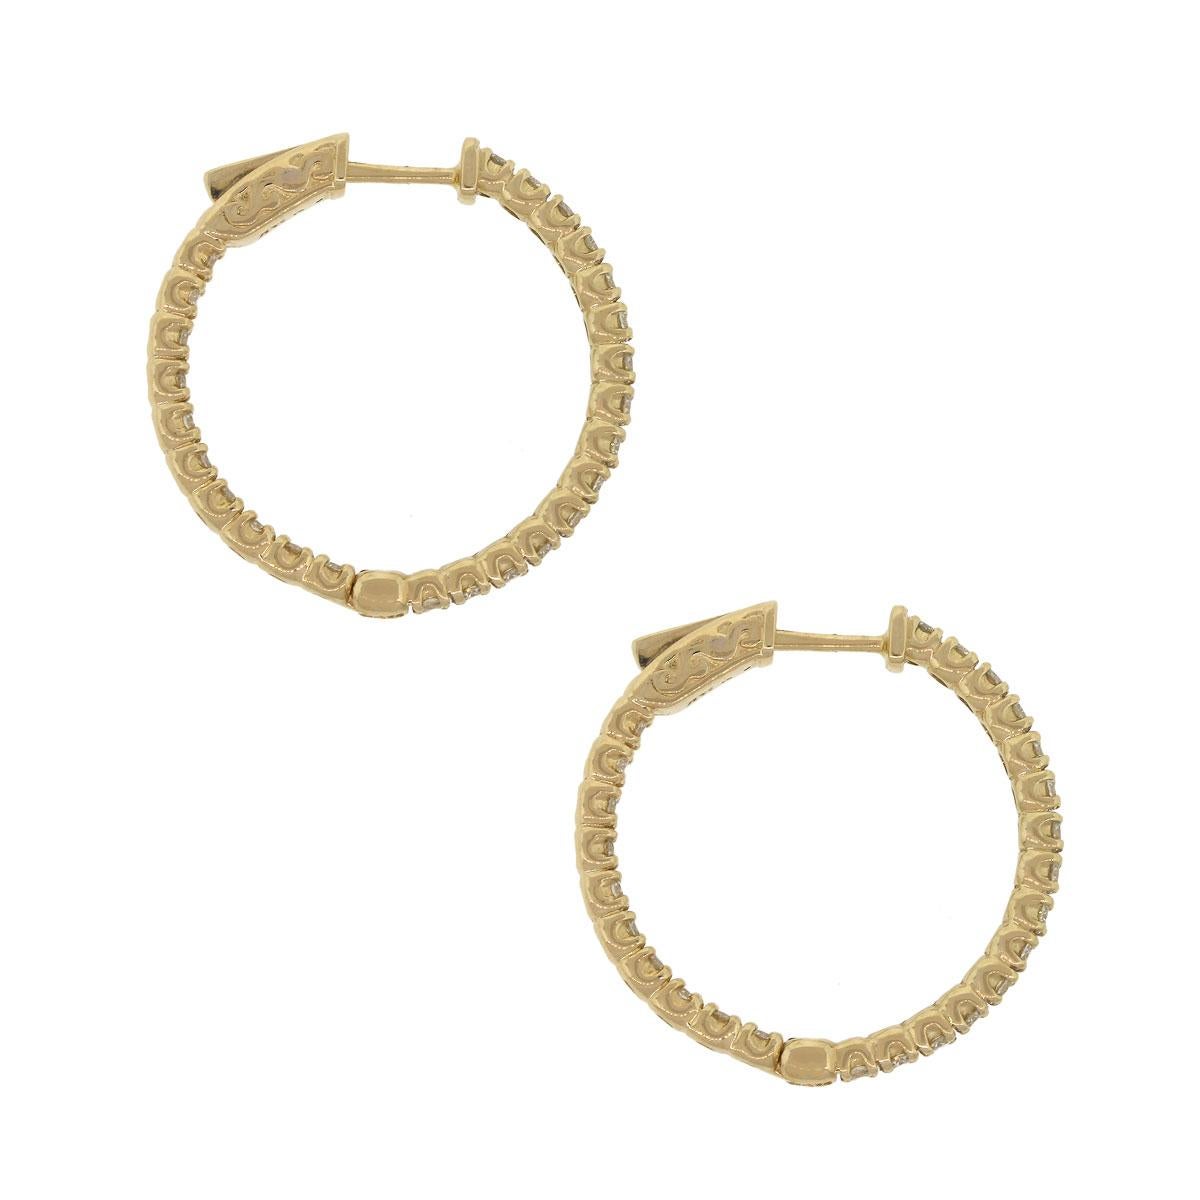 Round Cut Round Diamond Inside Out Hoops